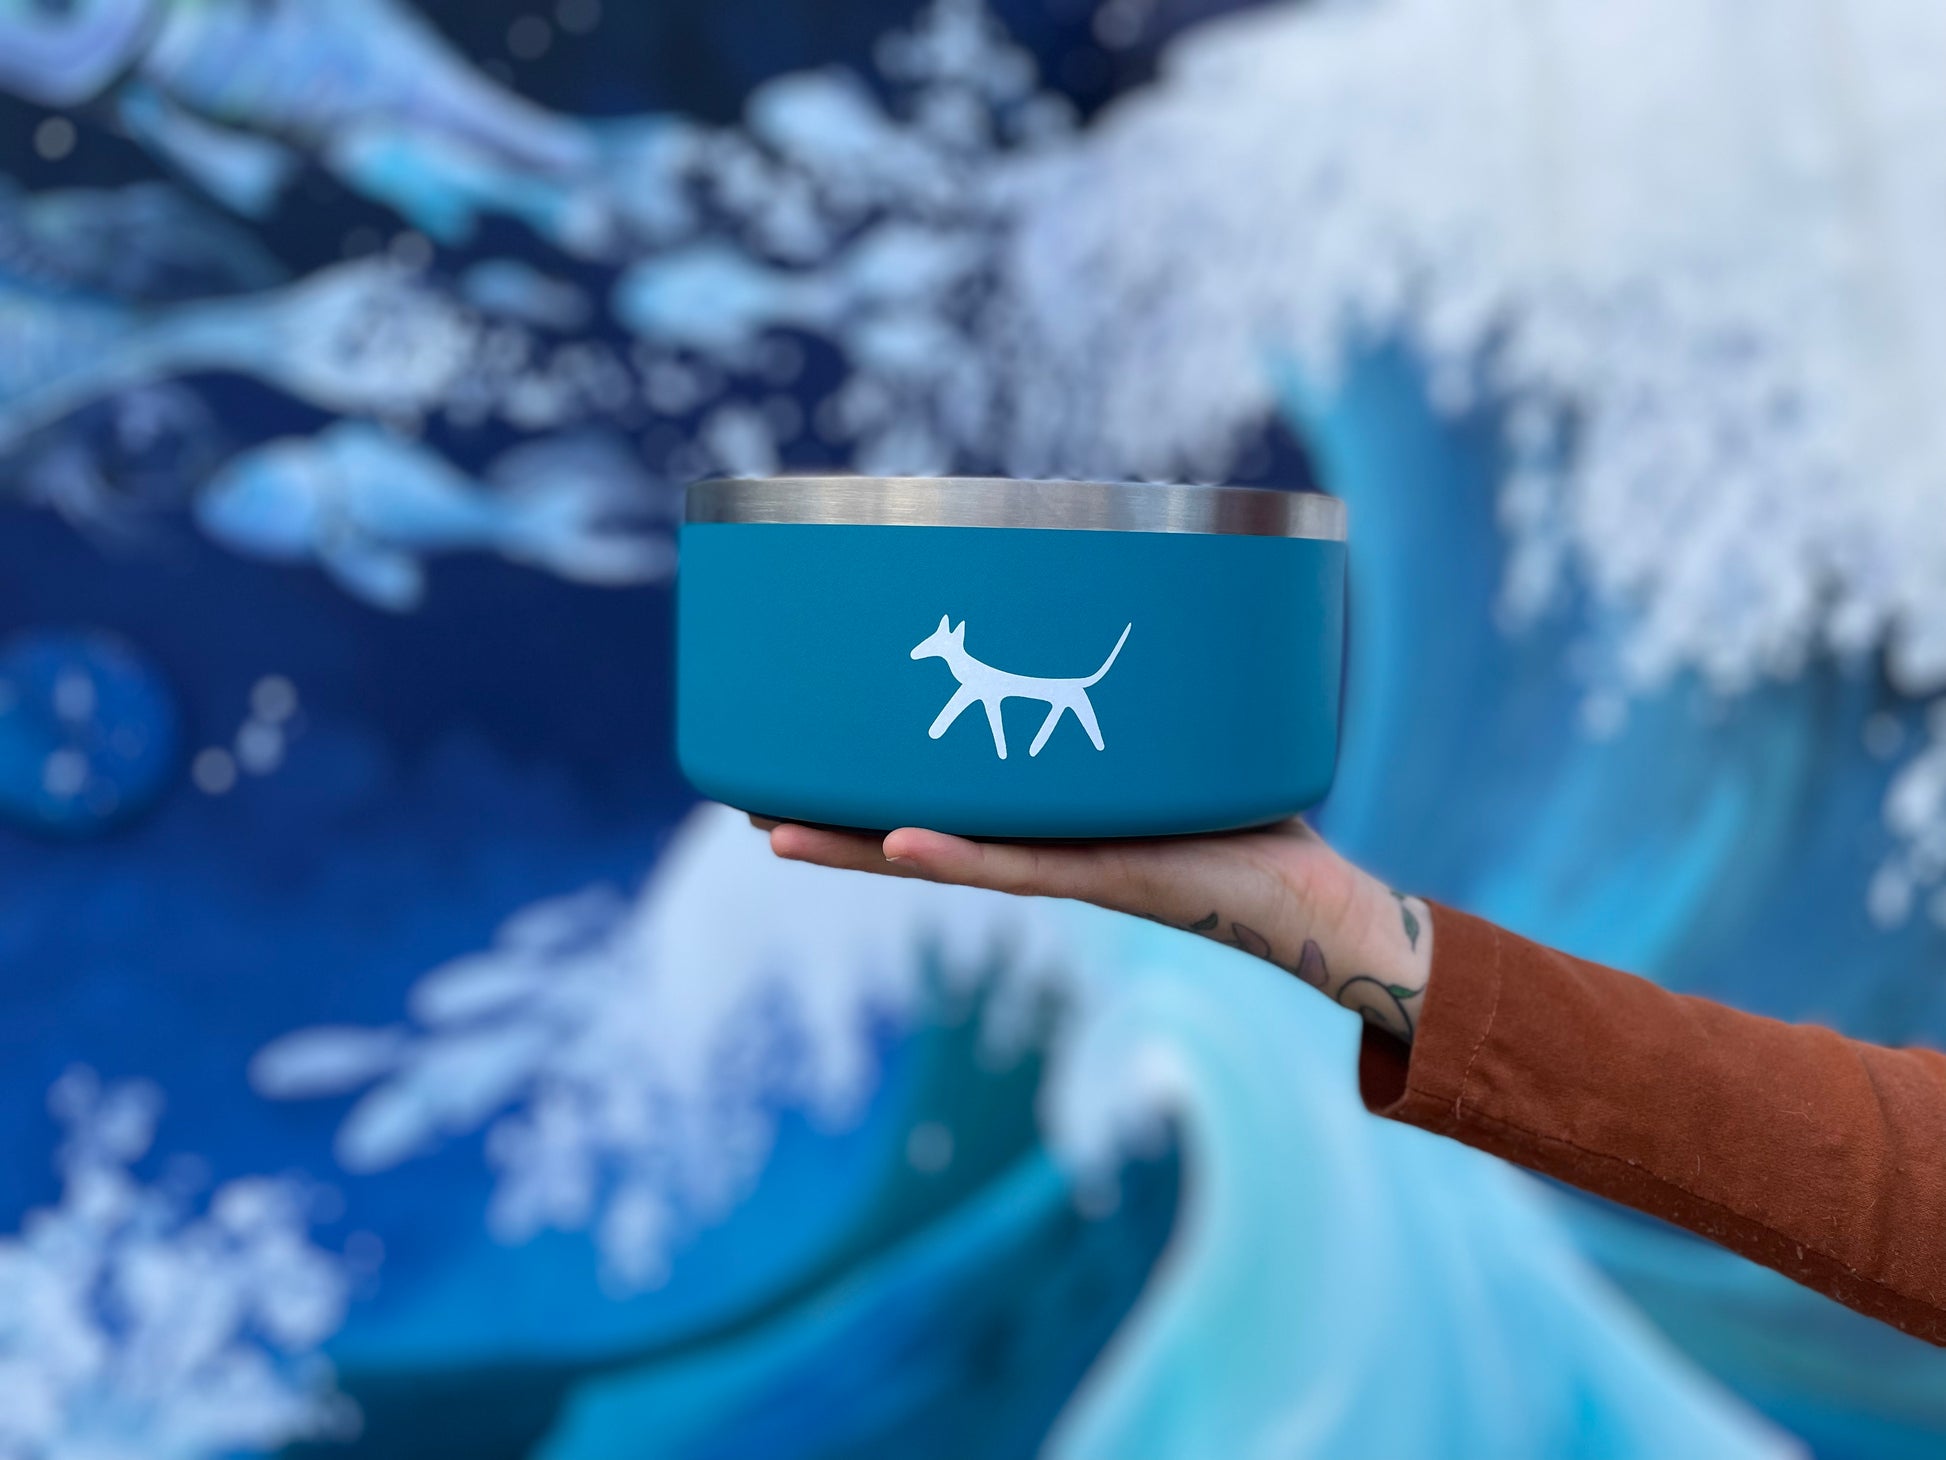 Female hand holding a stainless steel dog water bowl in lake colour with cream Droggo logo on the front. Blue and white mural blurred background.